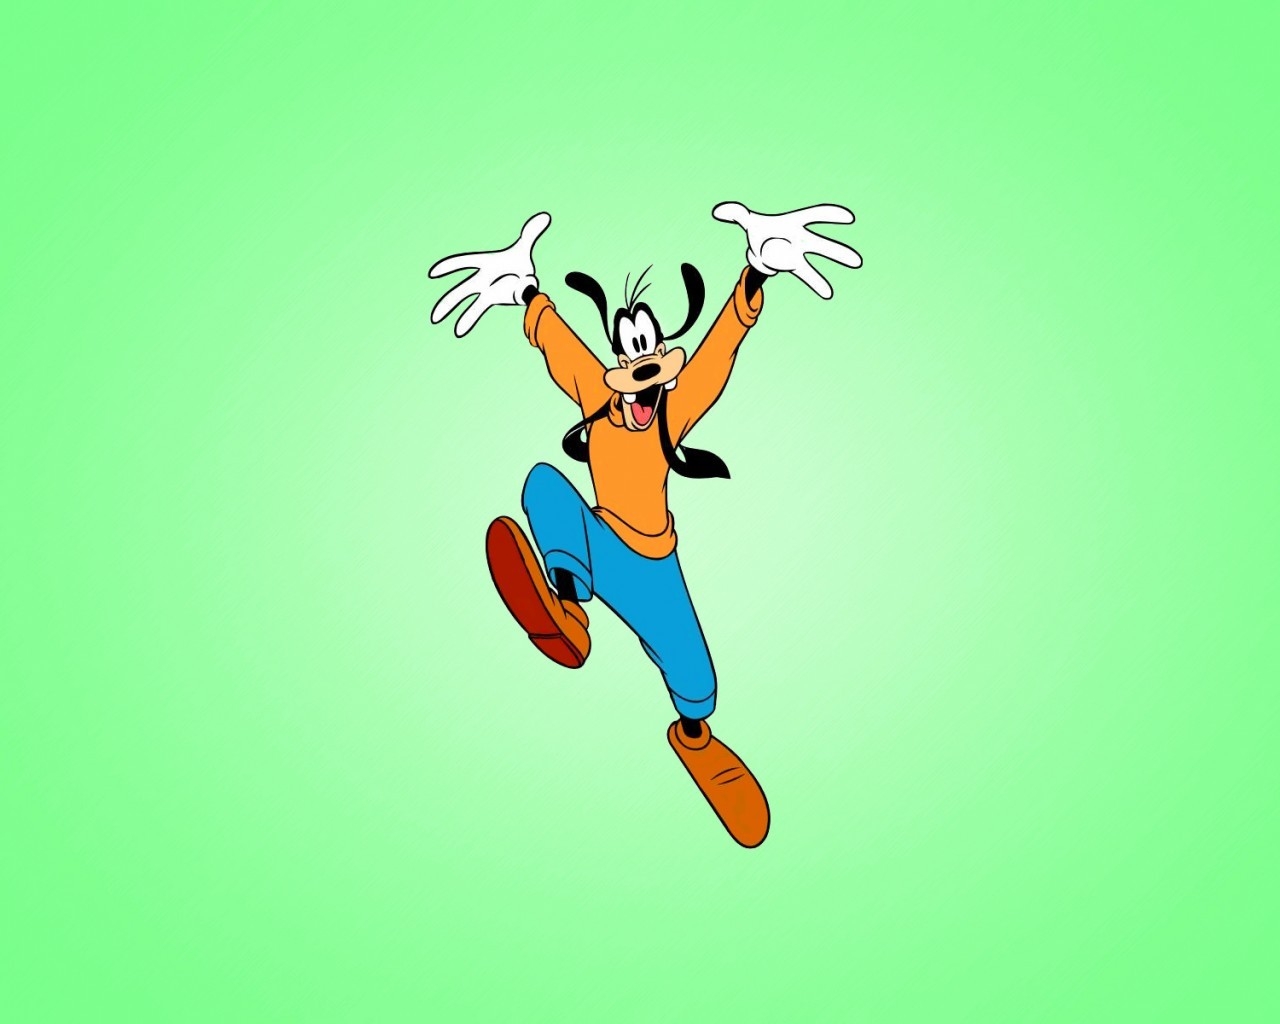 Goofy Character for 1280 x 1024 resolution